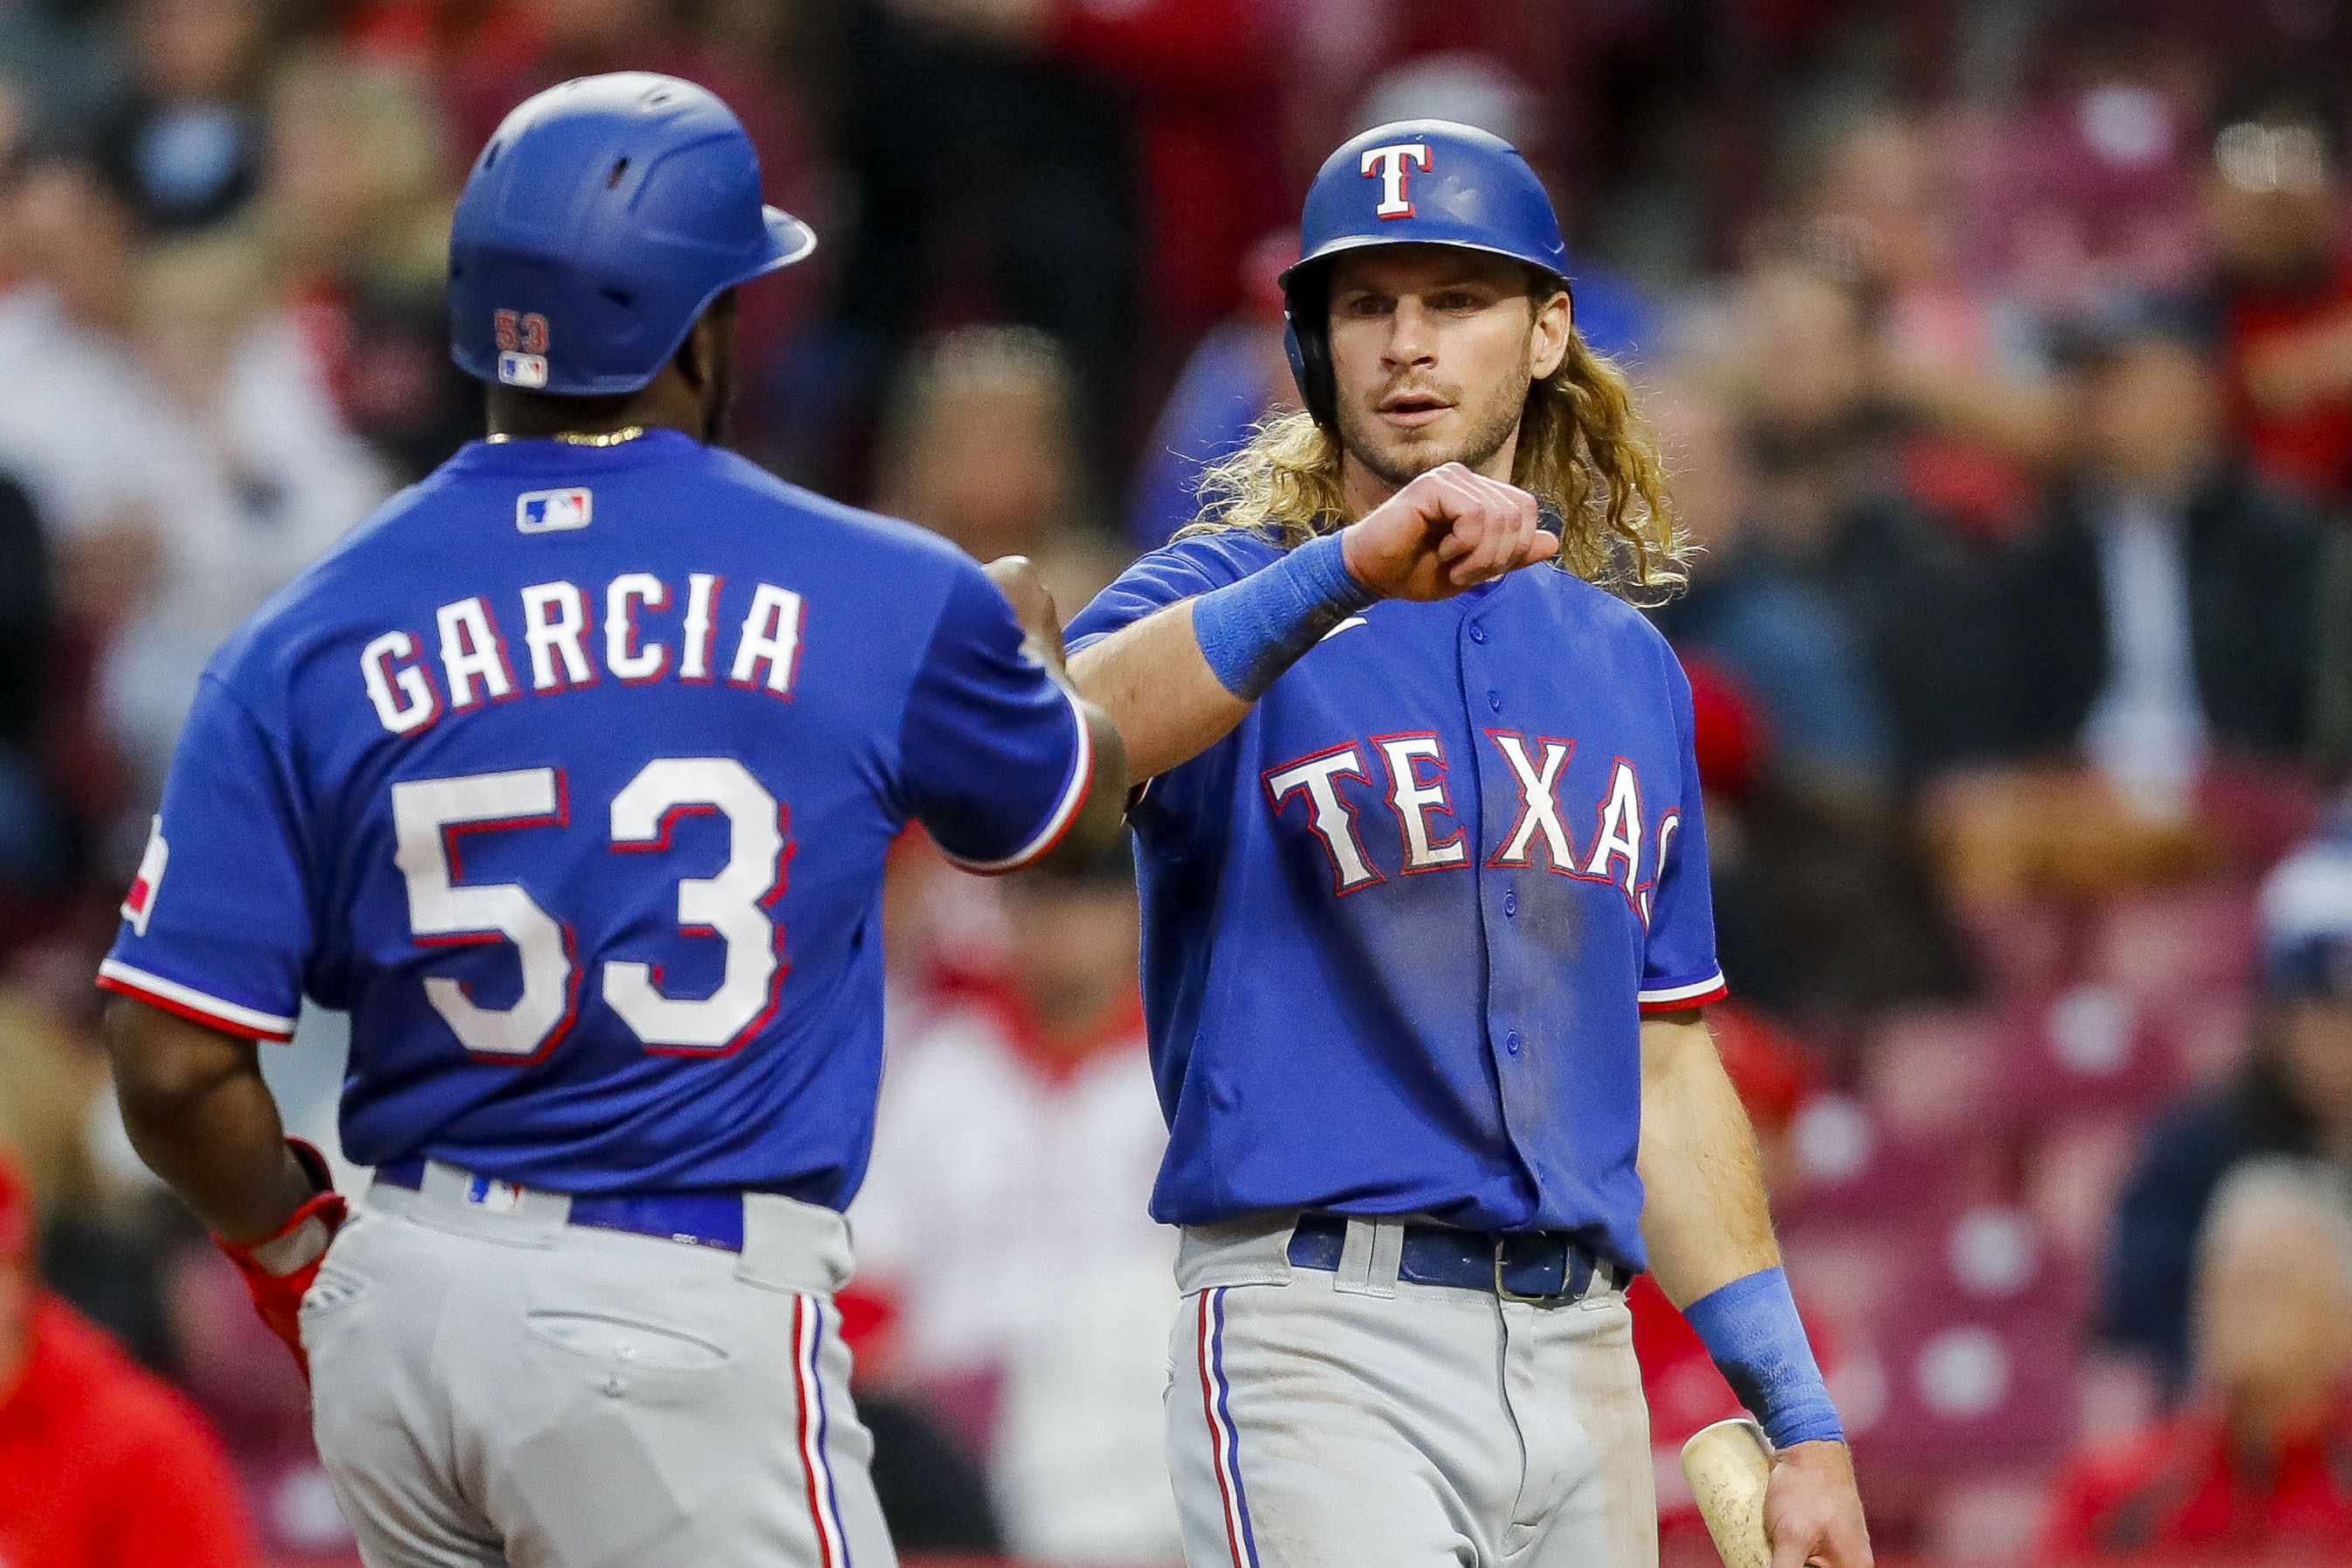 Nathaniel Lowe comes up big and helps propel the Texas Rangers to the ALCS